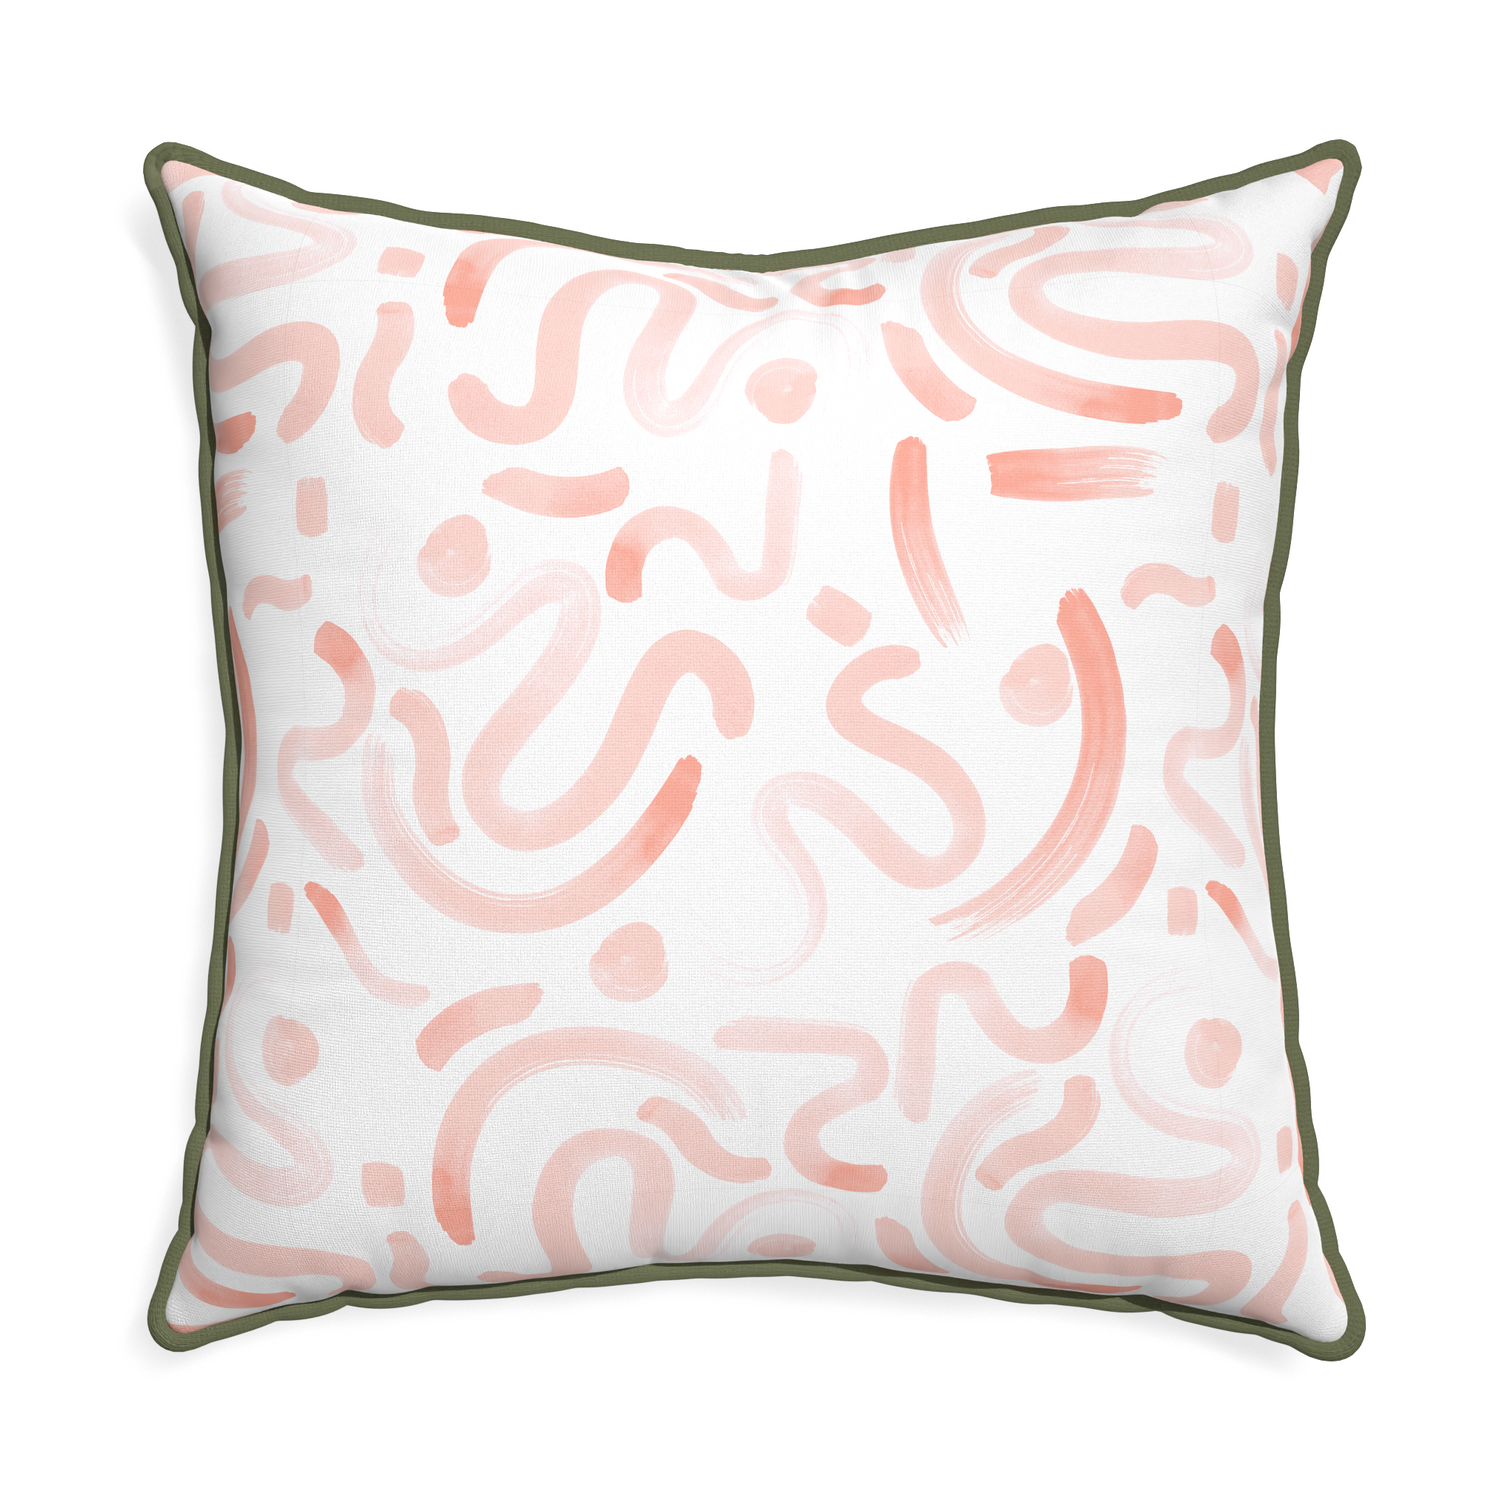 Euro-sham hockney pink custom pink graphicpillow with f piping on white background